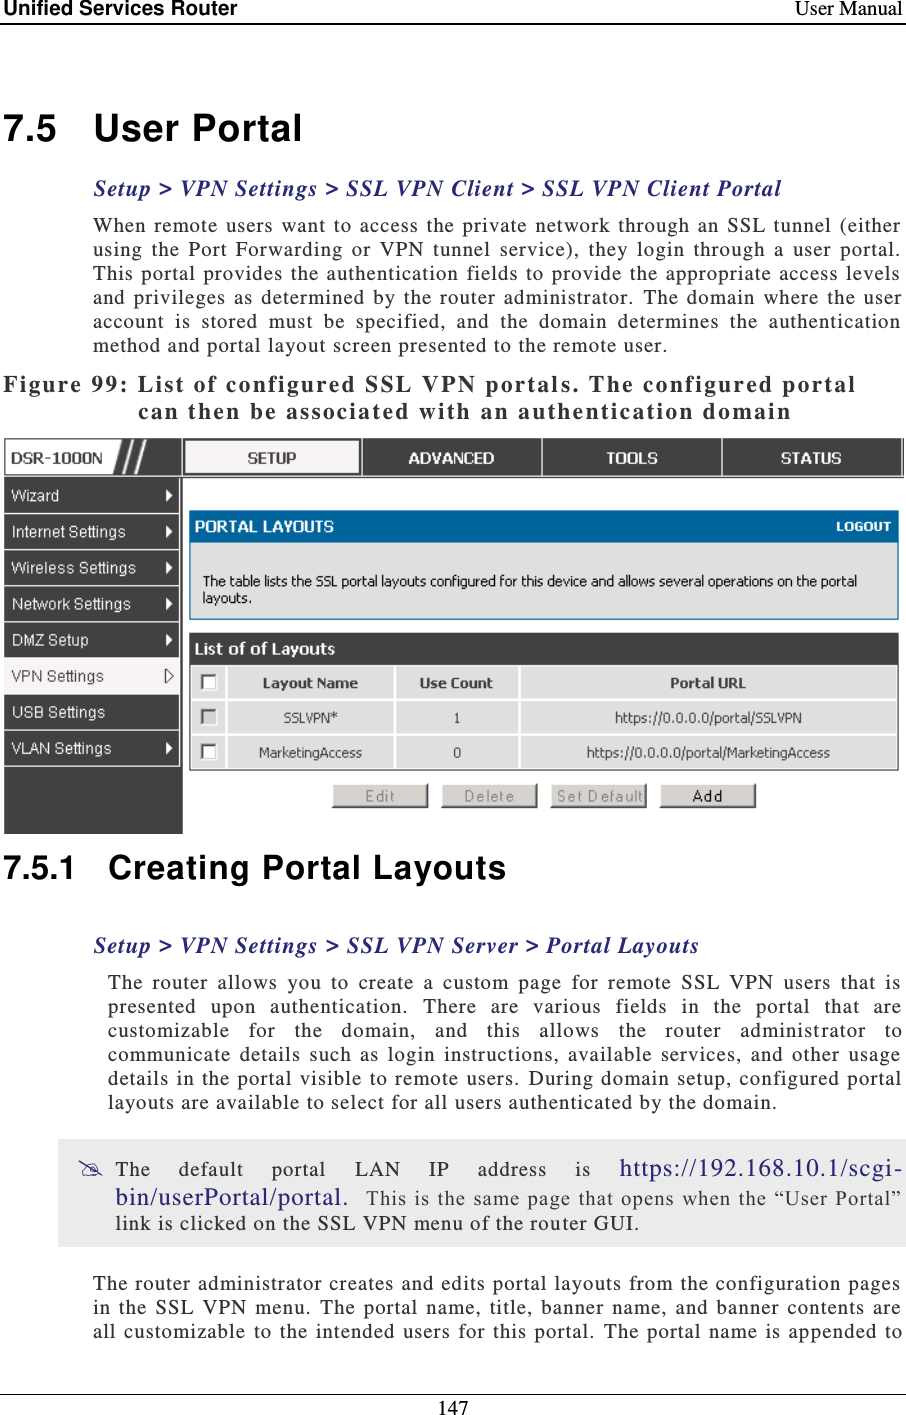 Unified Services Router    User Manual 147   7.5  User Portal Setup &gt; VPN Settings &gt; SSL VPN Client &gt; SSL VPN Client Portal  When  remote  users  want to  access  the  private  network  through  an  SSL  tunnel  (either using  the  Port  Forwarding  or  VPN  tunnel  service),  they  login  through  a  user  portal.  This portal  provides  the  authentication fields  to  provide the appropriate  access levels and  privileges  as  determined  by  the  router  administrator.   The domain  where the  user account  is  stored  must  be  specified,  and  the  domain  determines  the  authentication method and portal layout screen presented to the remote user.  Figure 99: Li st of configured SSL VPN portal s. The configured portal can then be associated with an authentication domai n   7.5.1  Creating Portal Layouts Setup &gt; VPN Settings &gt; SSL VPN Server &gt; Portal Layouts The  router  allows  you  to  create  a  custom  page  for  remote  SSL  VPN  users  that  is presented  upon  authentication.   There  are  various  fields  in  the  portal  that  are customizable  for  the  domain,  and  this  allows  the  router  administ rator  to communicate  details  such  as  login  instructions,  available  services,  and  other  usage details in  the portal  visible to remote  users.   During domain setup,  configured portal layouts are available to select for all users authenticated by the domain.    The  default  portal  LAN  IP  address  is  https://192.168.10.1/scgi-bin/userPortal/portal.   This  is the  same page that opens when  the “User Portal” link is clicked on the SSL VPN menu of the router GUI.  The router administrator creates and edits portal layouts from the configuration  pages in  the  SSL  VPN  menu.  The  portal  name,  title,  banner  name,  and  banner  contents  are all  customizable  to the intended  users for  this  portal. The portal  name is appended to 